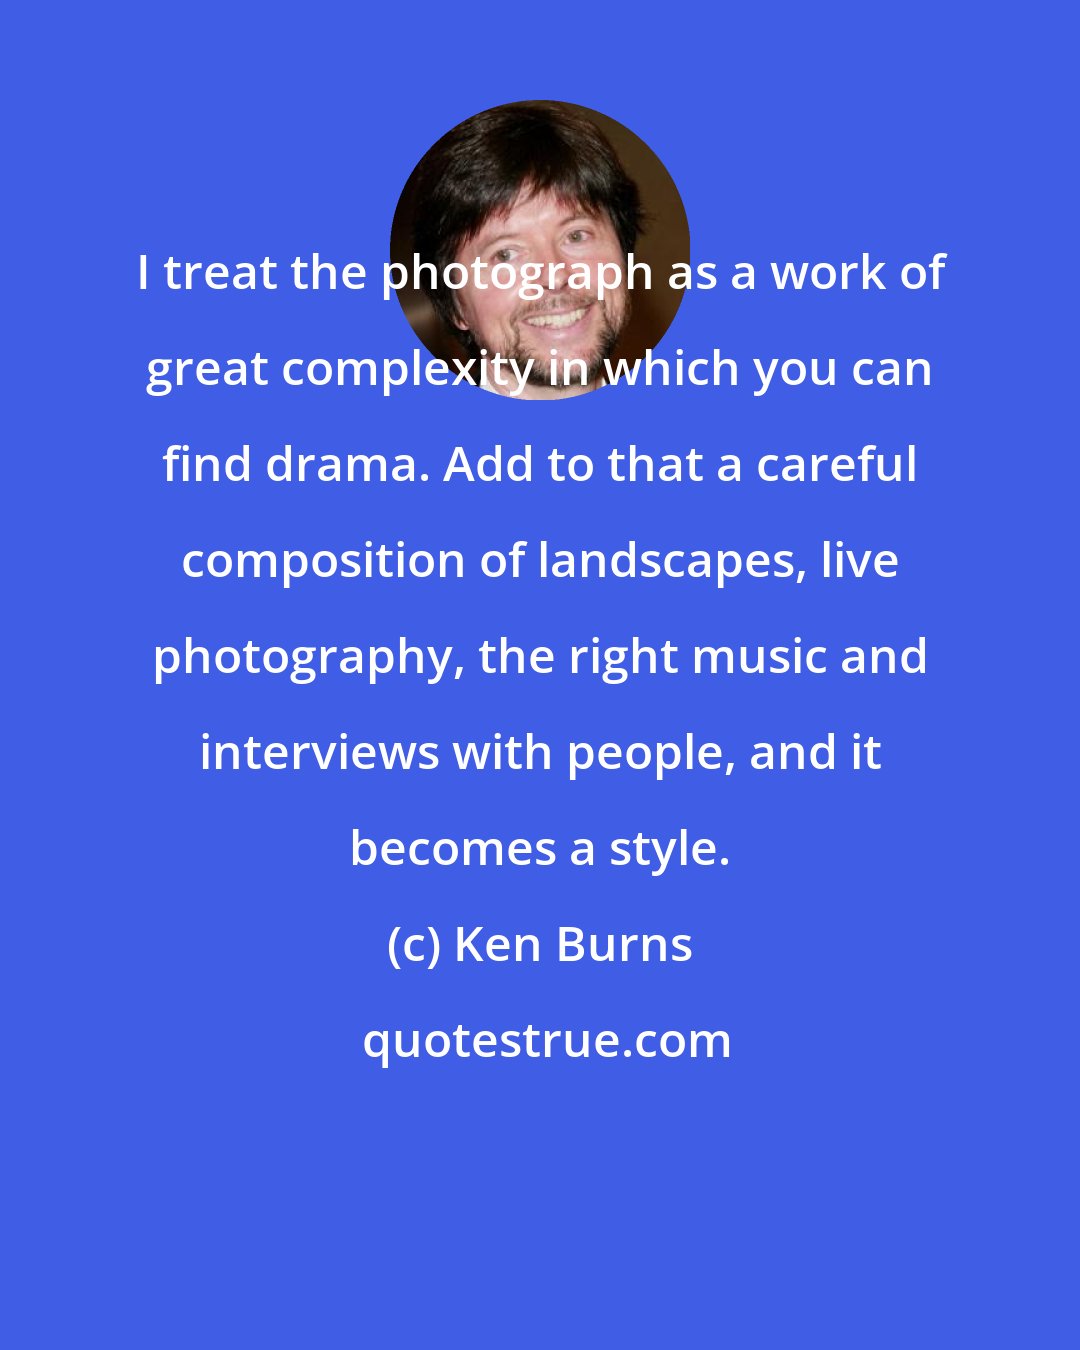 Ken Burns: I treat the photograph as a work of great complexity in which you can find drama. Add to that a careful composition of landscapes, live photography, the right music and interviews with people, and it becomes a style.